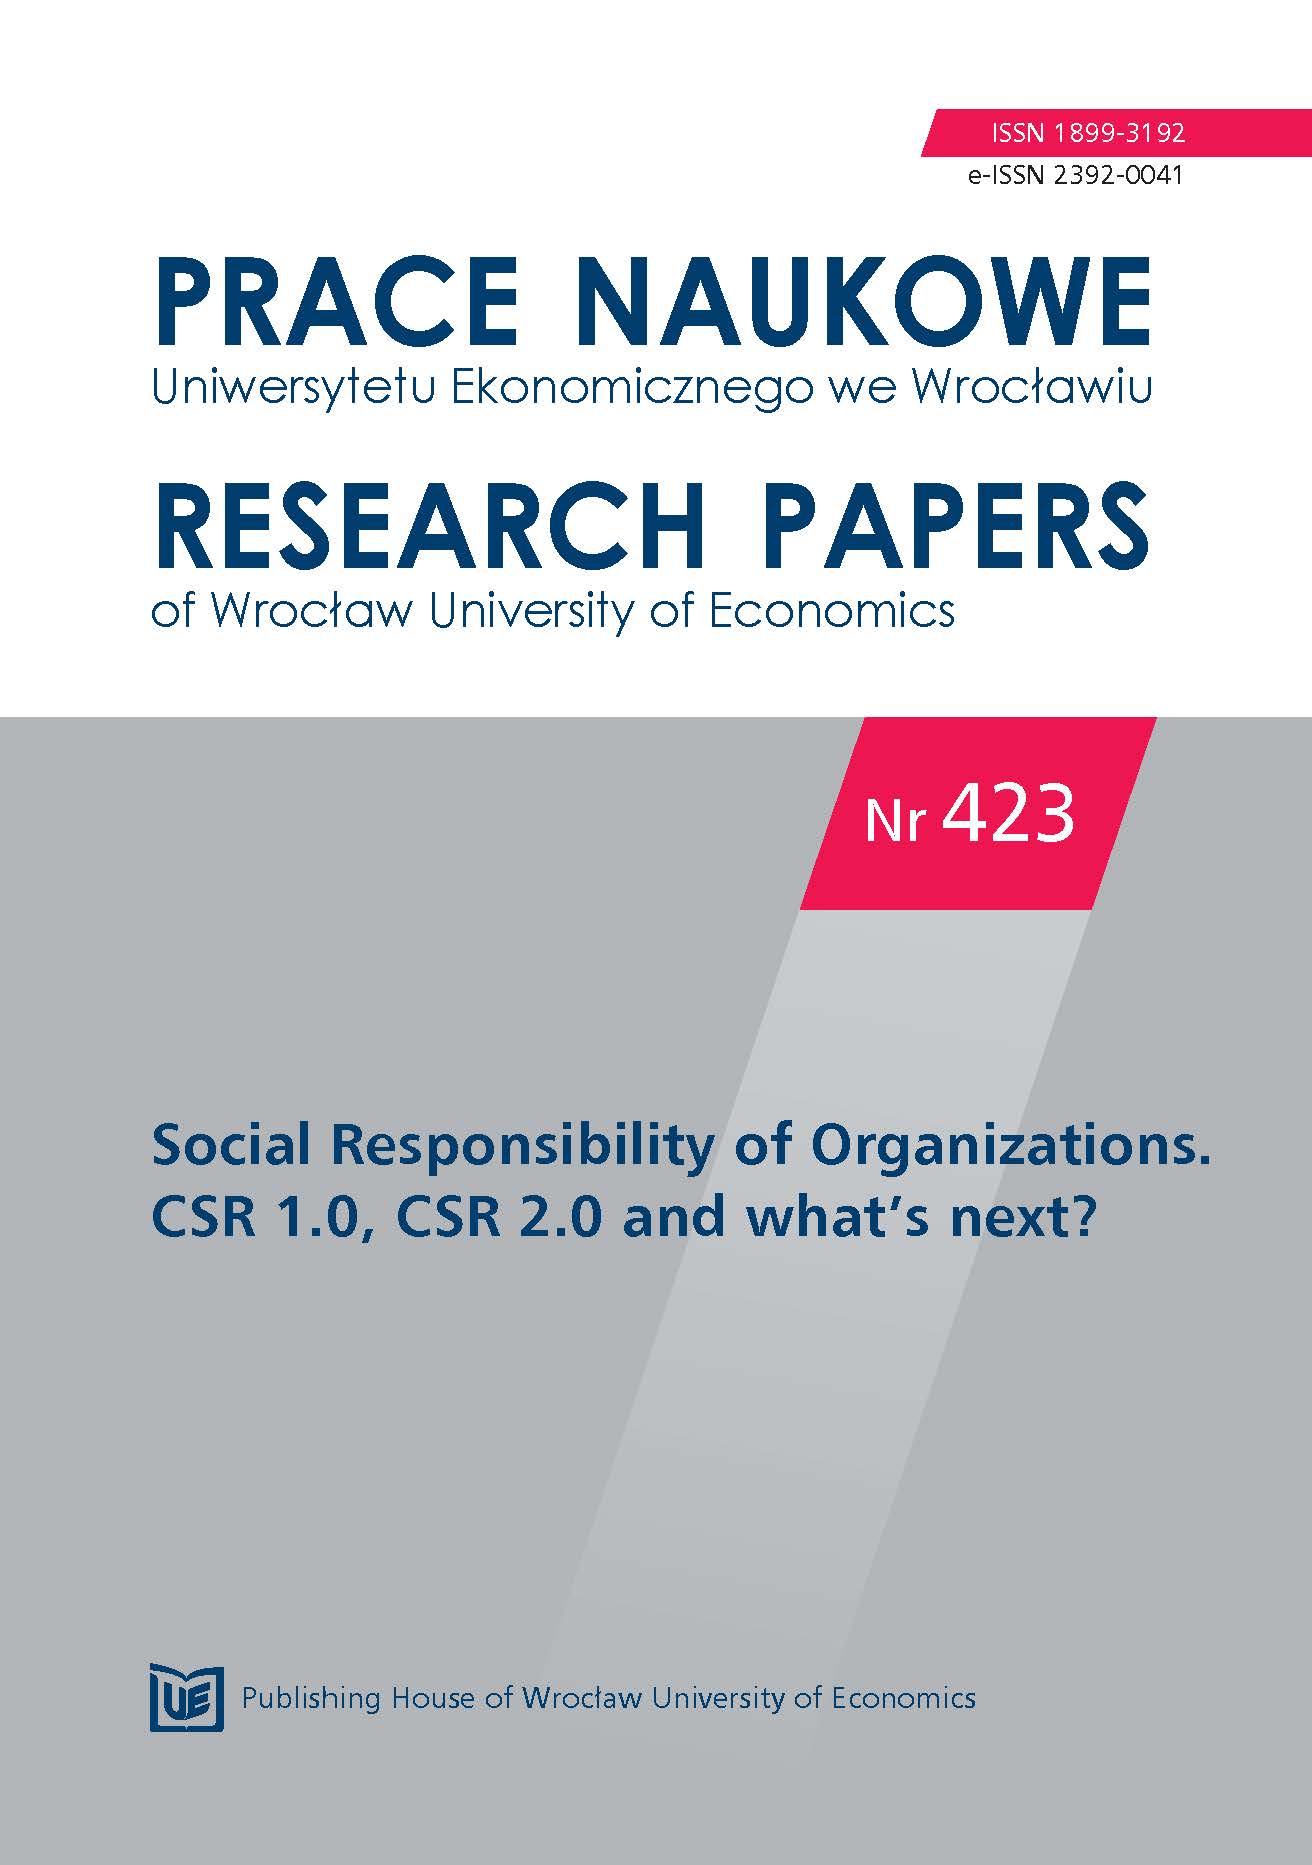 Acquaintance with the fair trade idea in Poland – results of the research